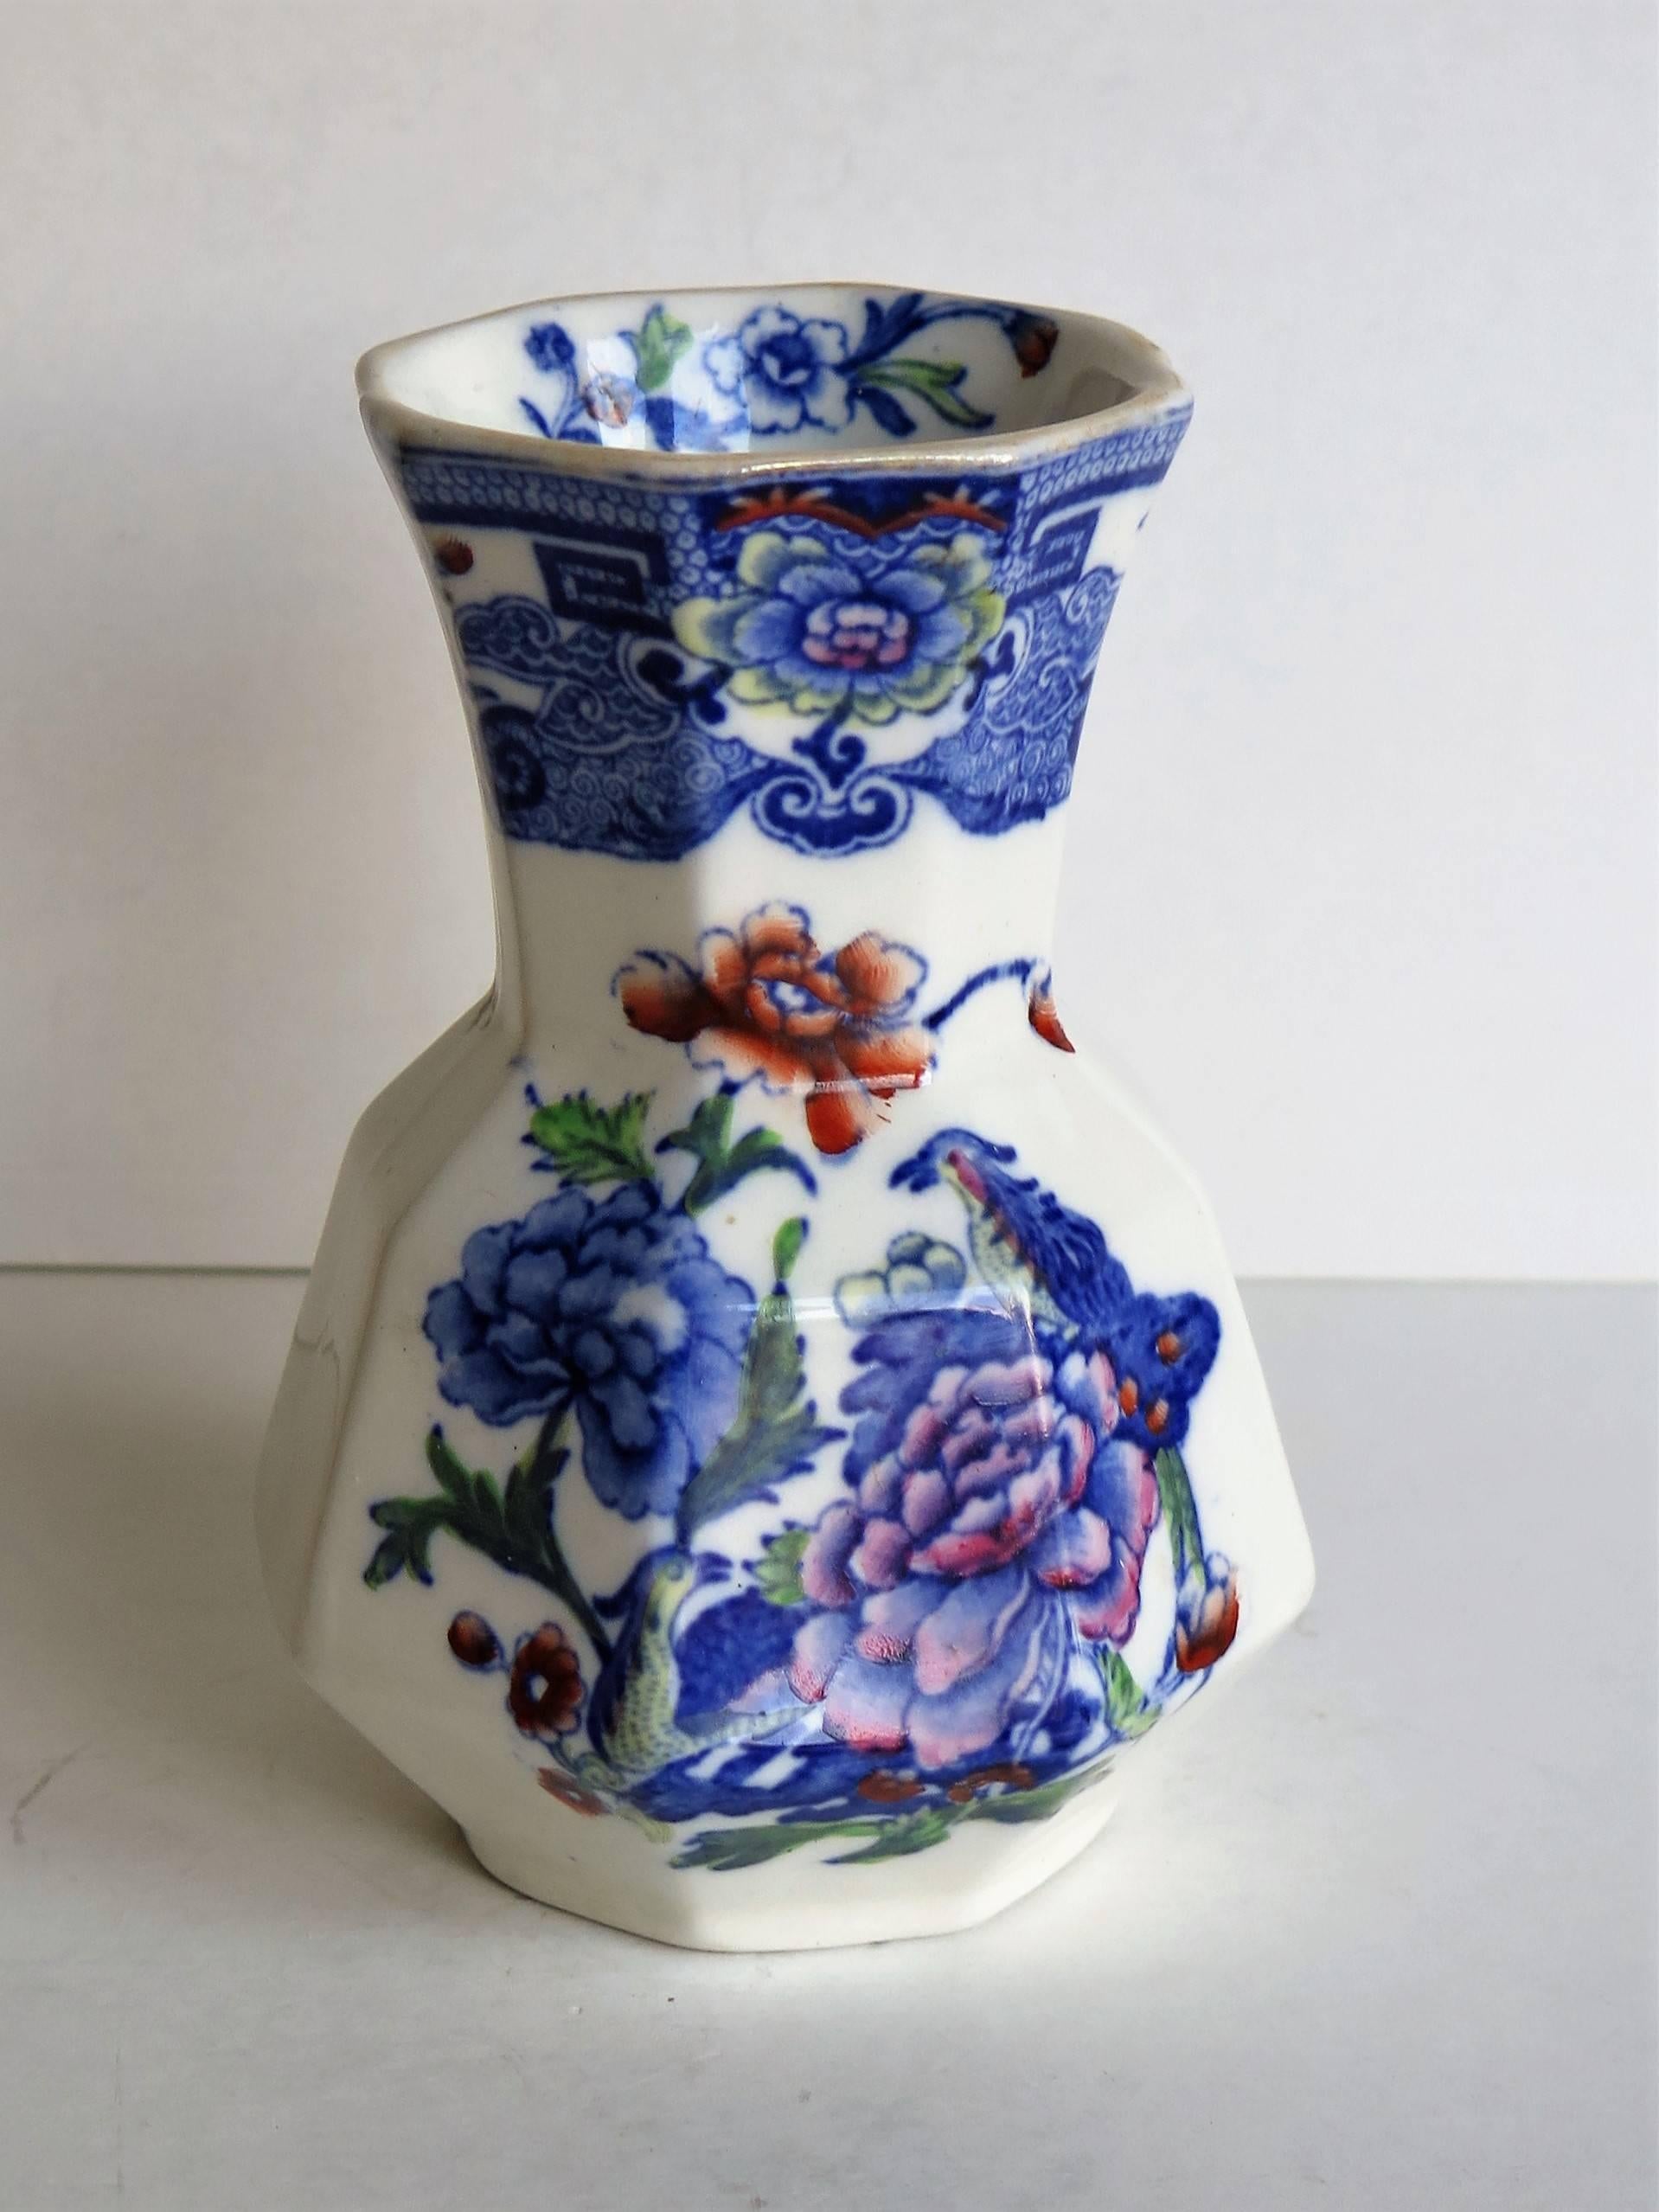 This is a good spill vase or beaker made by Mason's ironstone, Lane Delph, England in the last quarter of the 19th century, circa 1880.

The pattern is called India Pheasant and shows two birds perched by two large peonies in a blue and white